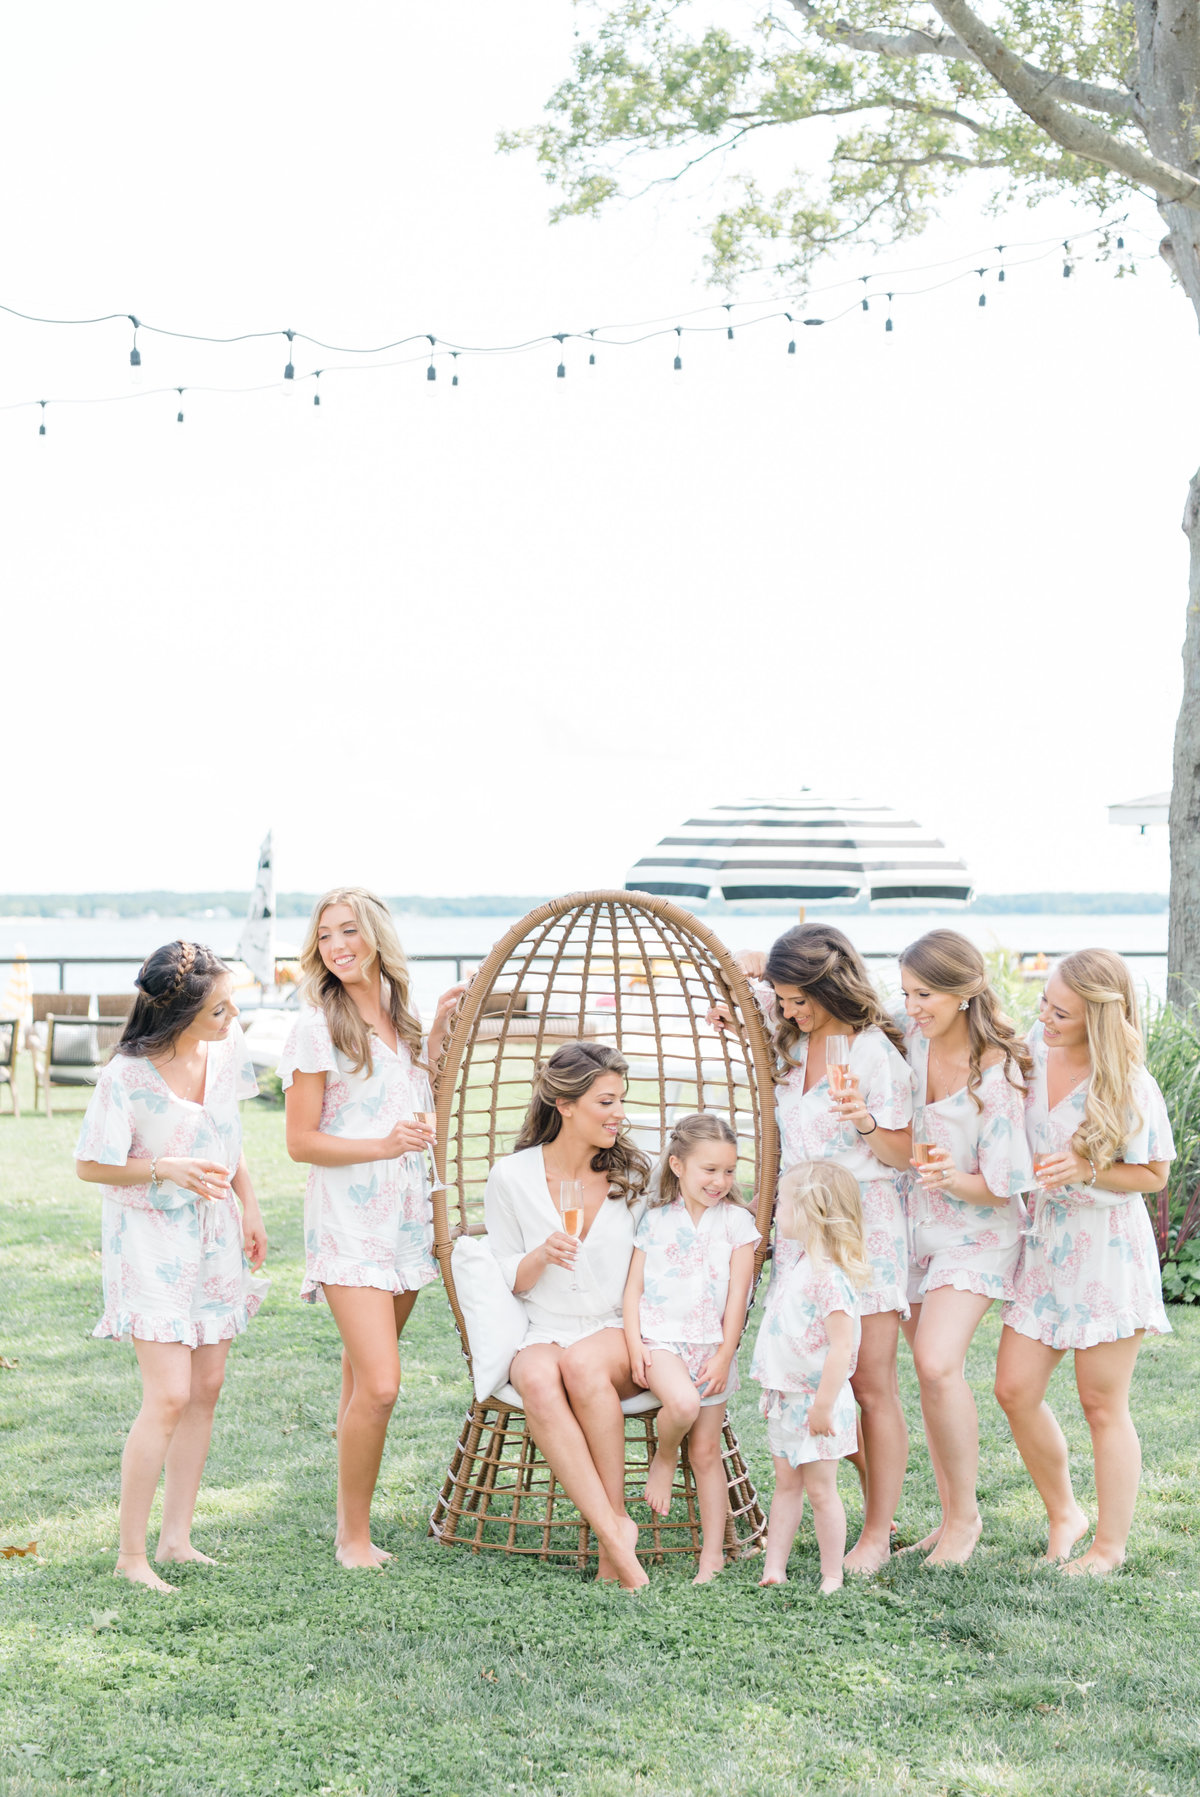 Bridal-party-photography-bridesmaids-flower-girls